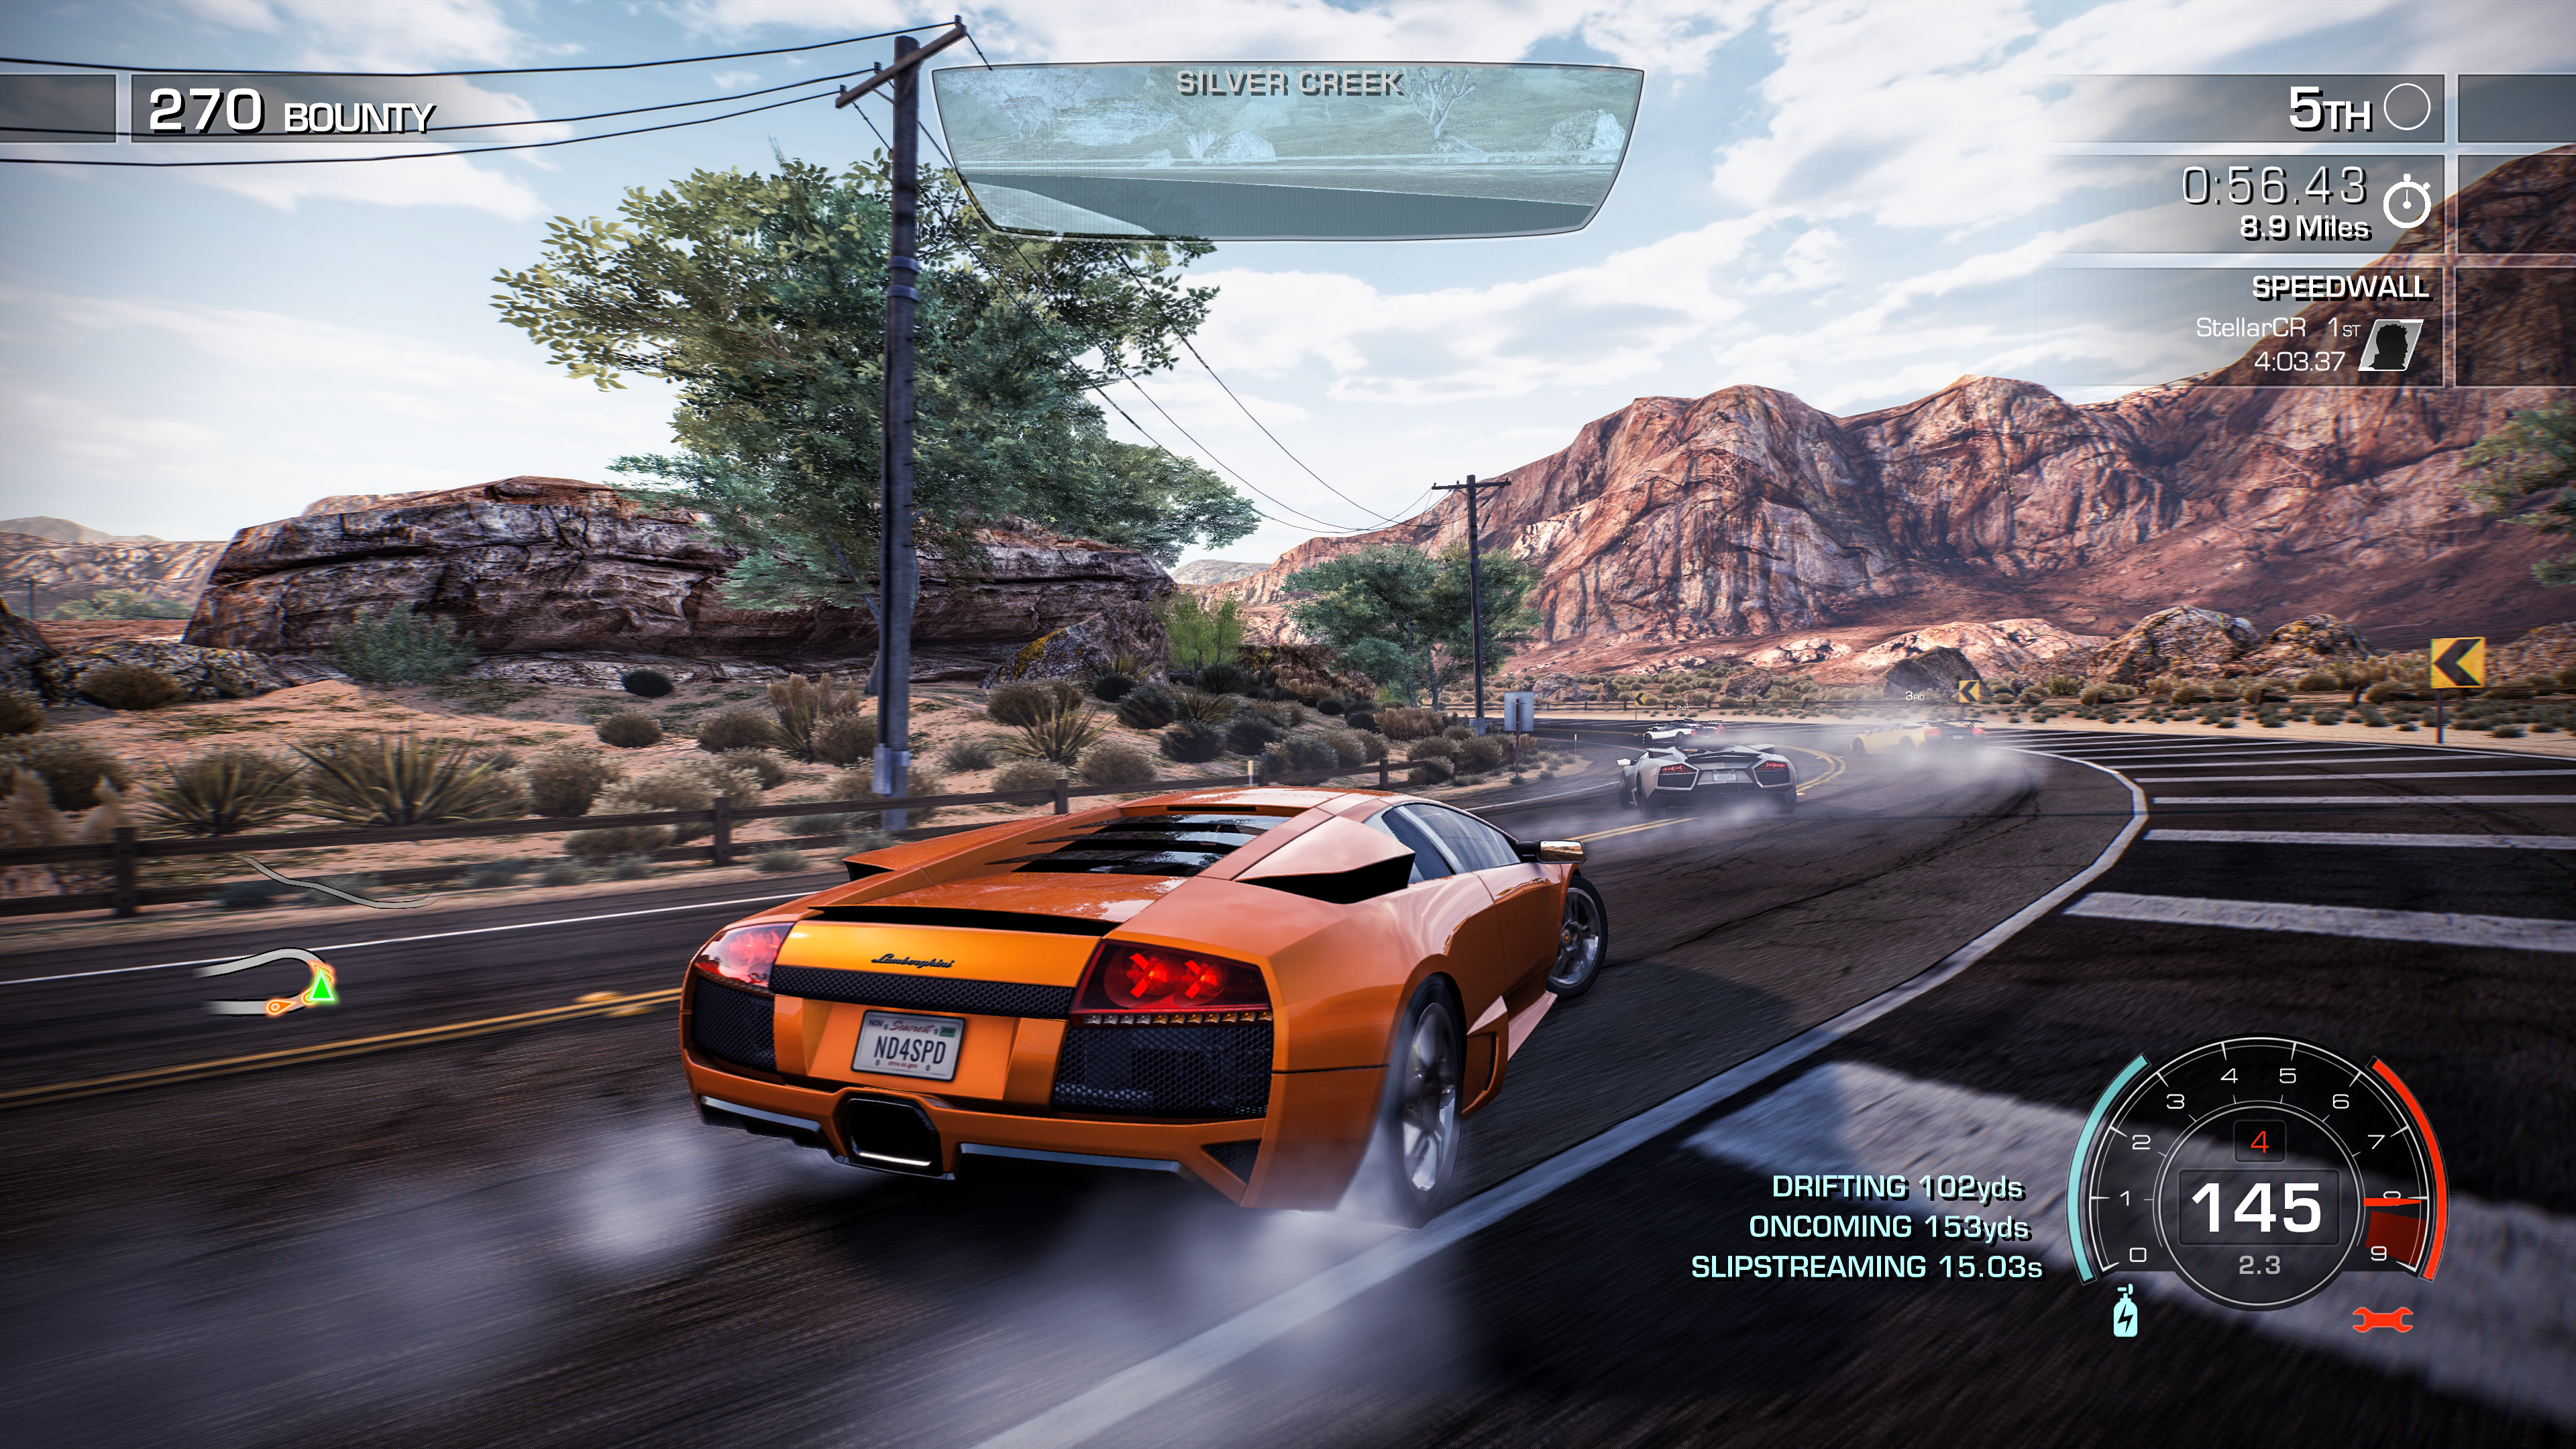 PS4 Need For Speed Hot Pursuit - Remastered - Disponibile in 2/3 giorni lavorativi Electronic Arts